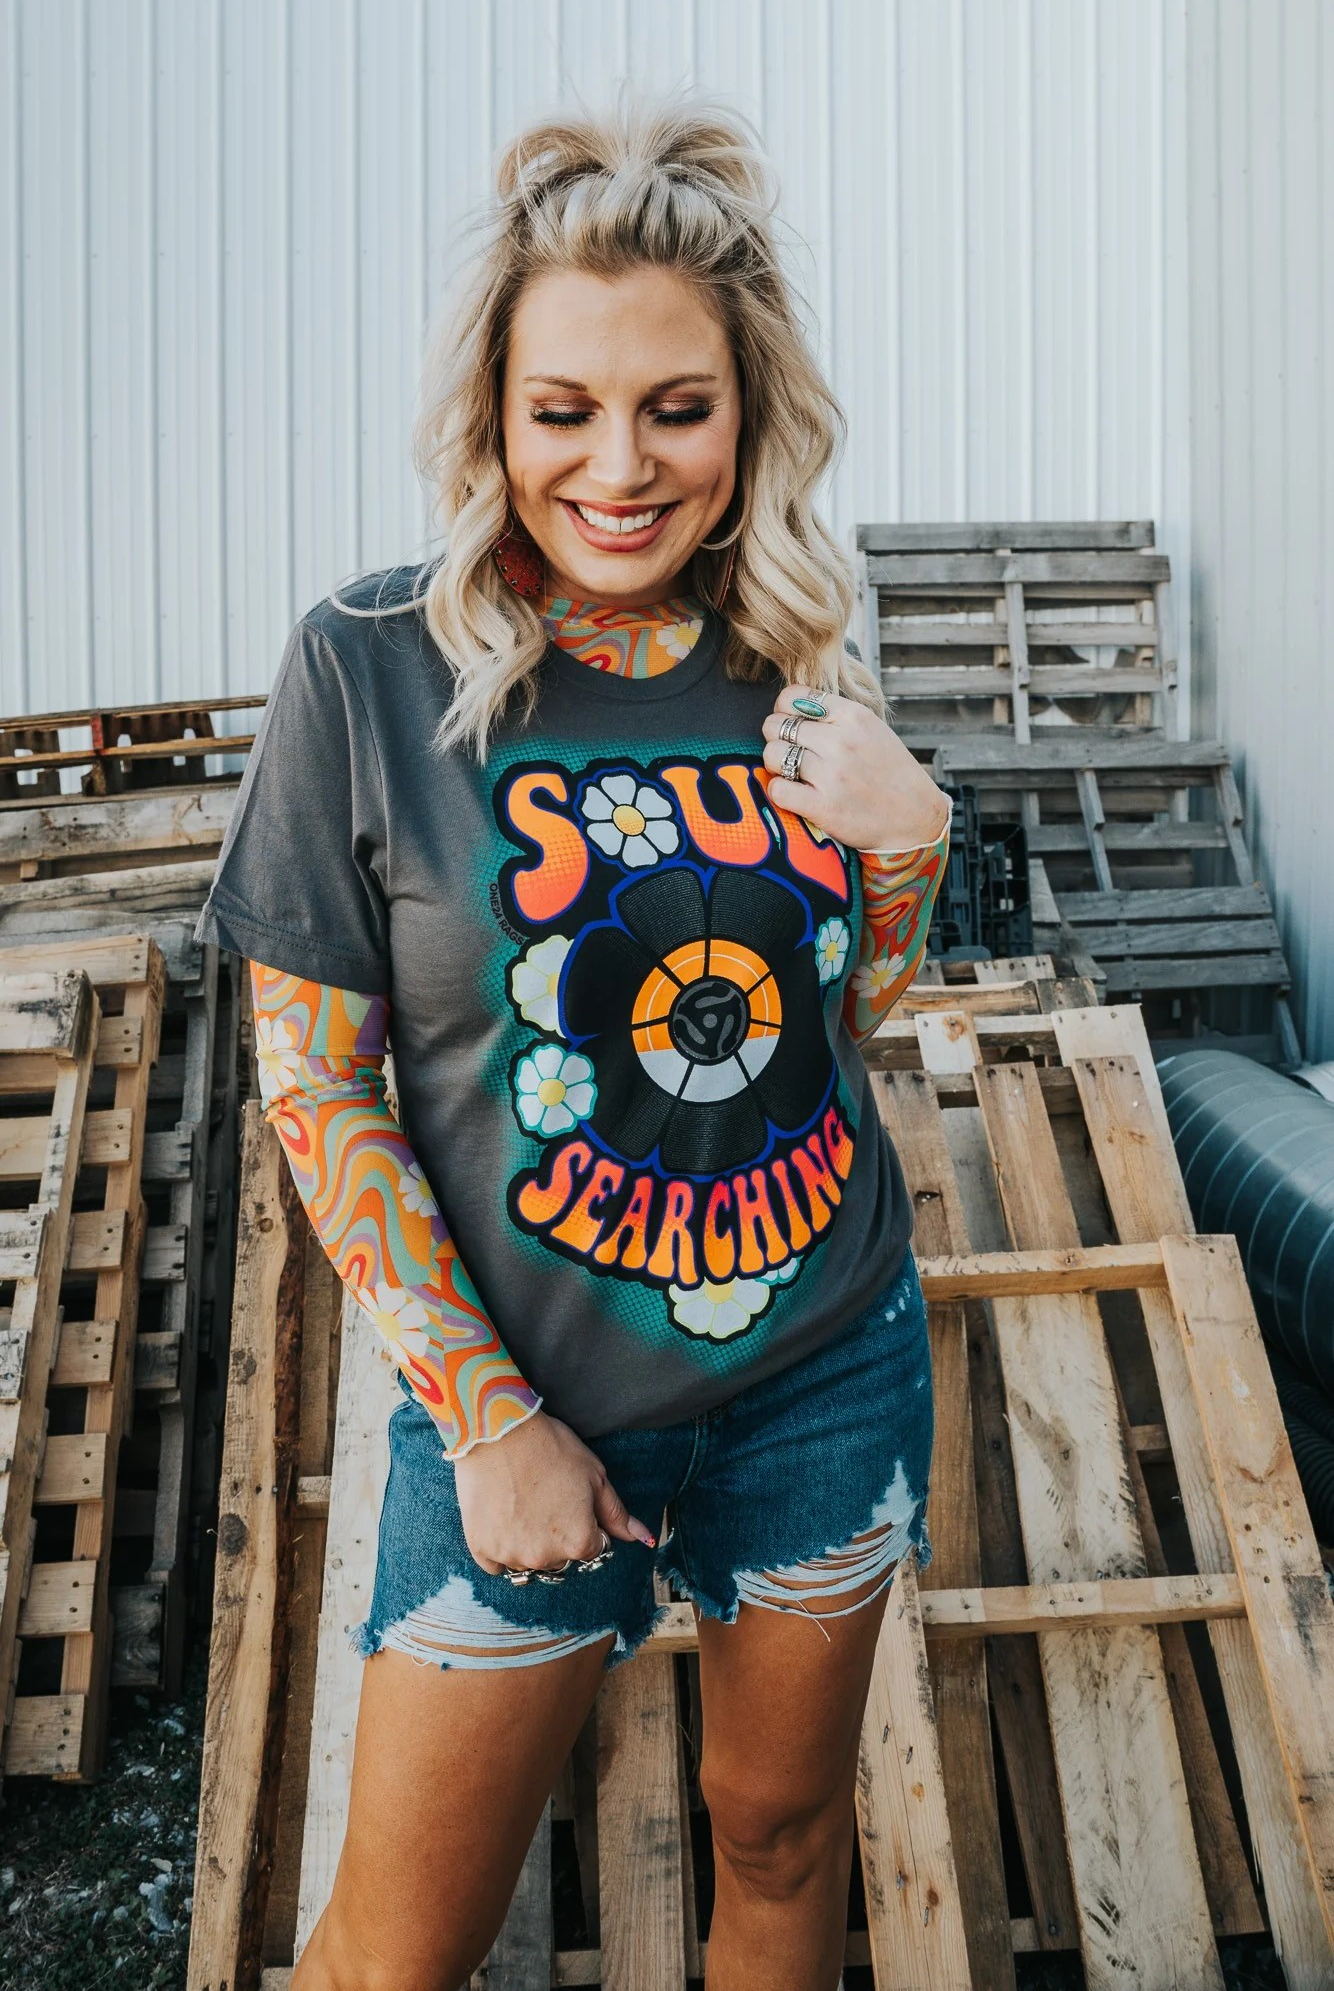 Soul Searching Graphic Tee / Stuffology Boutique-Graphic Tees-One24 Rags-Stuffology - Where Vintage Meets Modern, A Boutique for Real Women in Crosbyton, TX